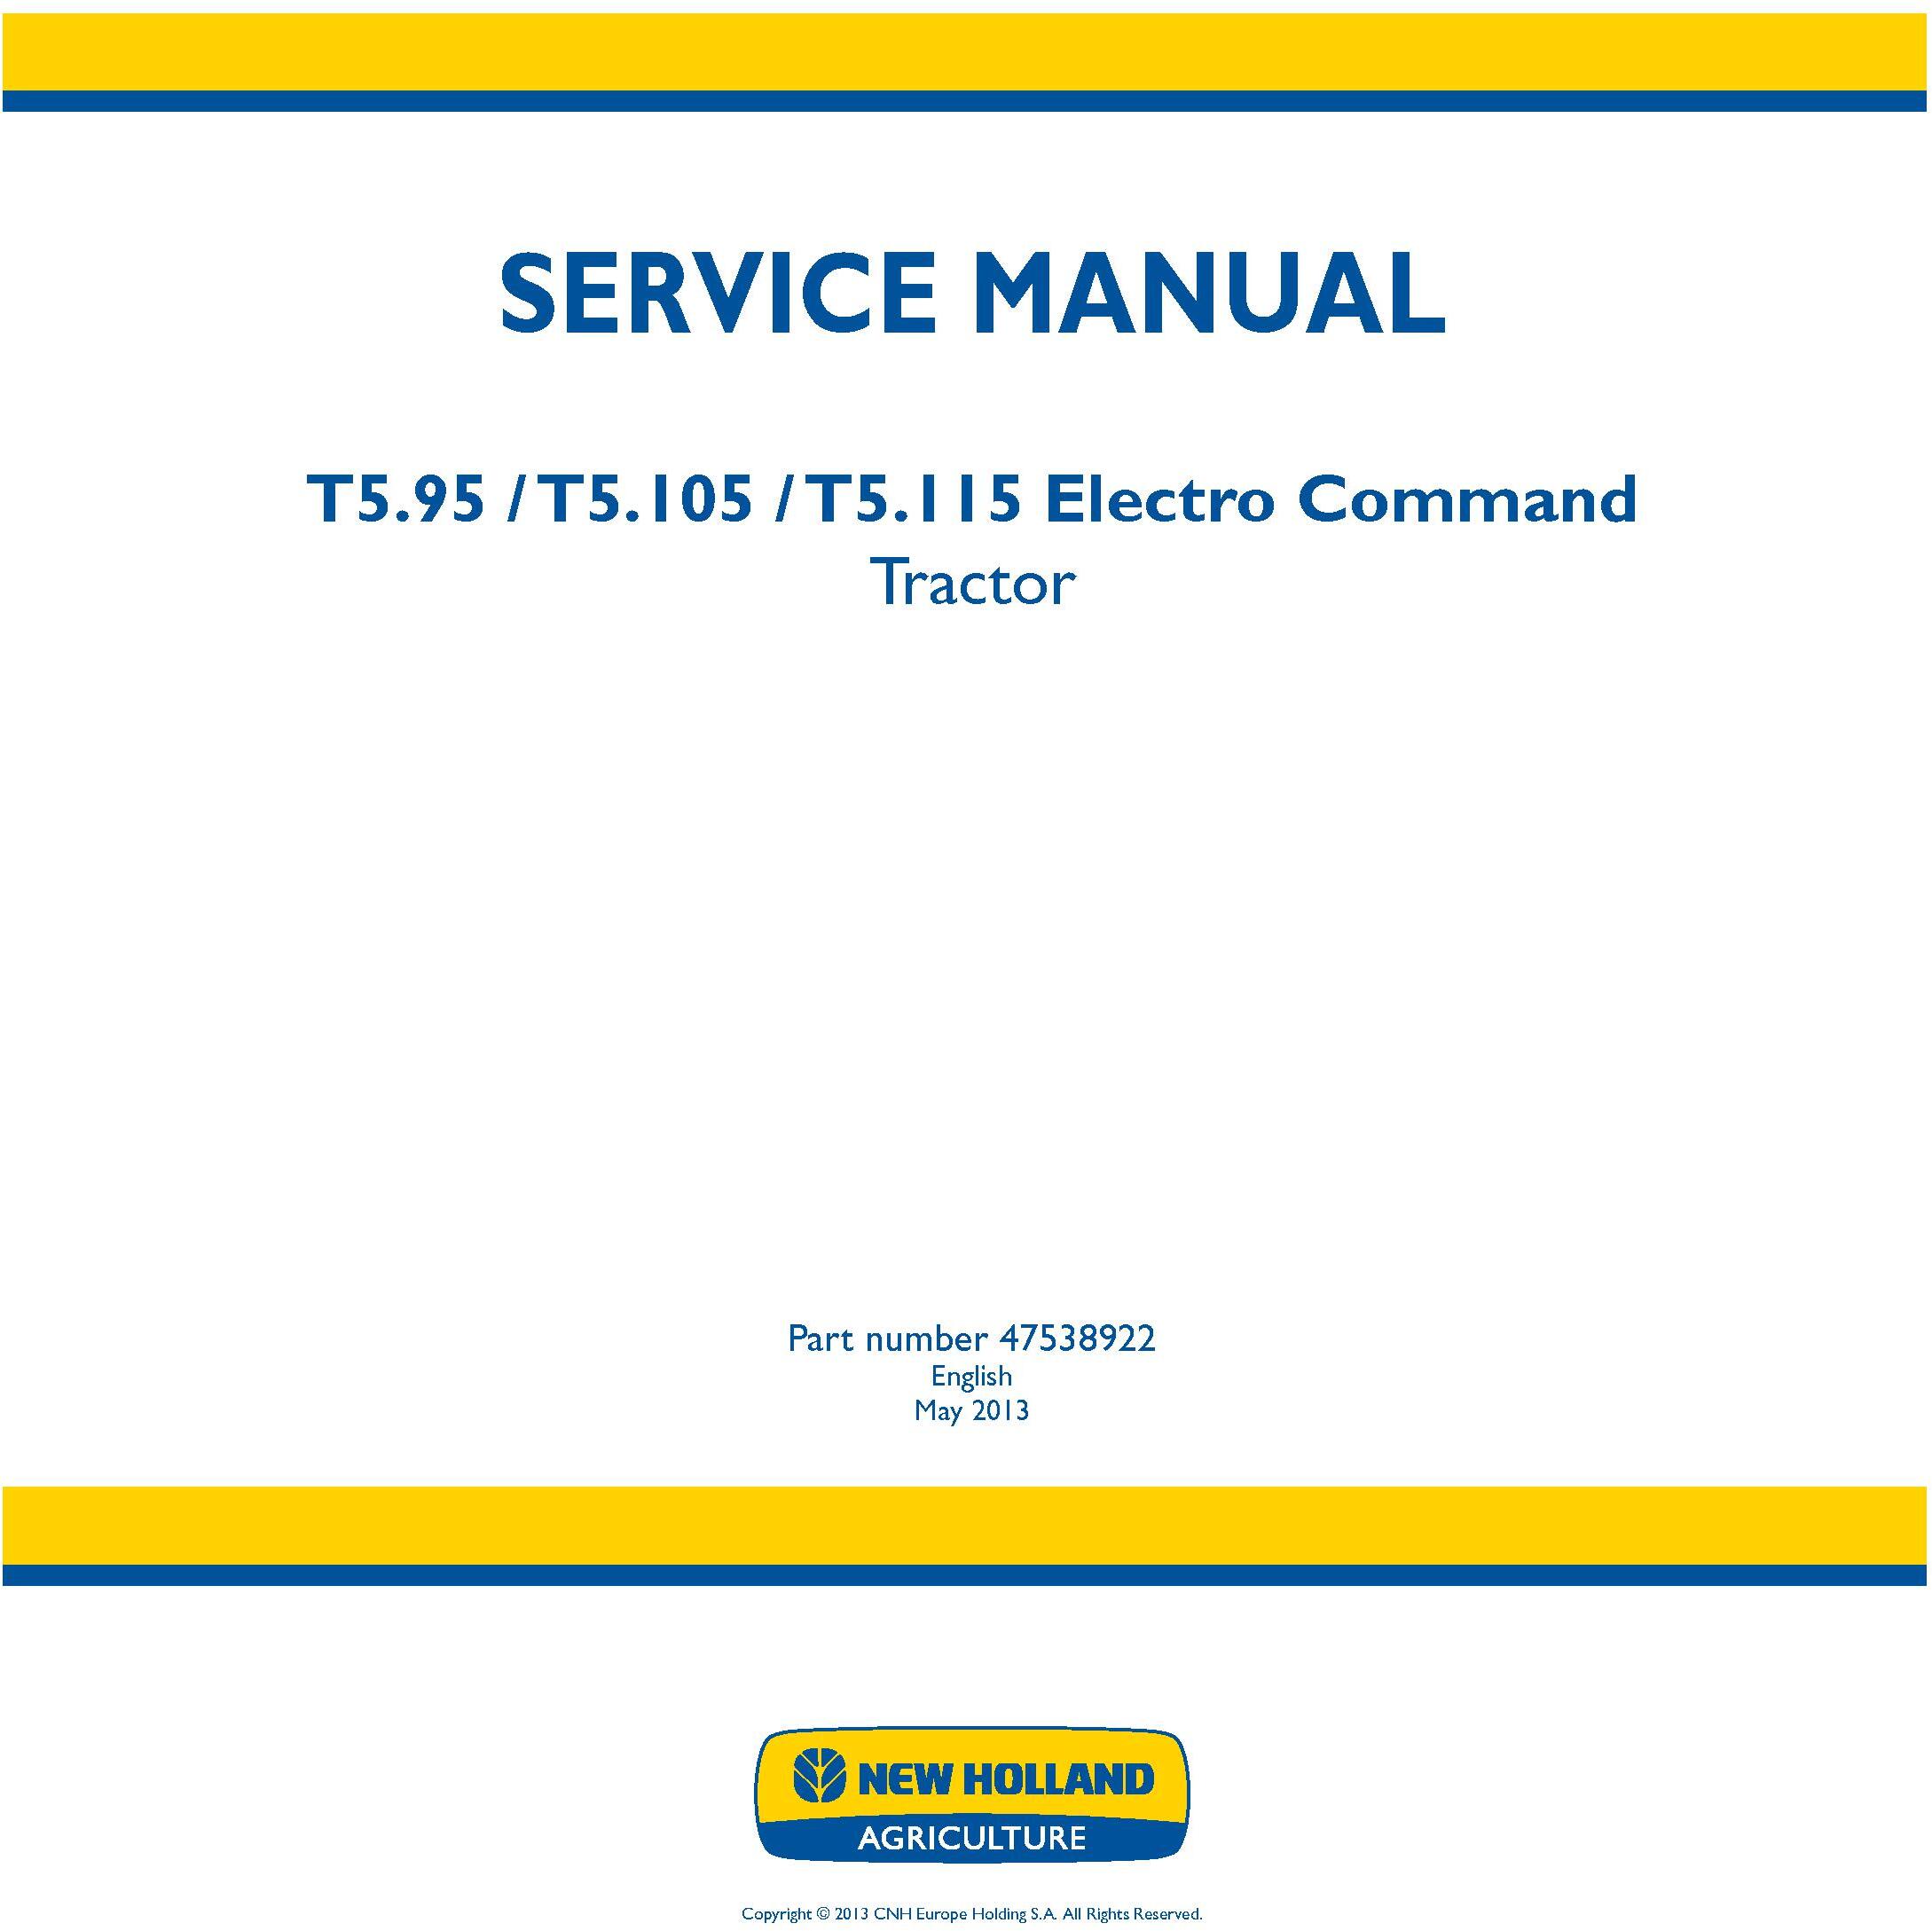 New Holland T5.95, T5.105, T5.115 Electro Command Tractor Service Manual